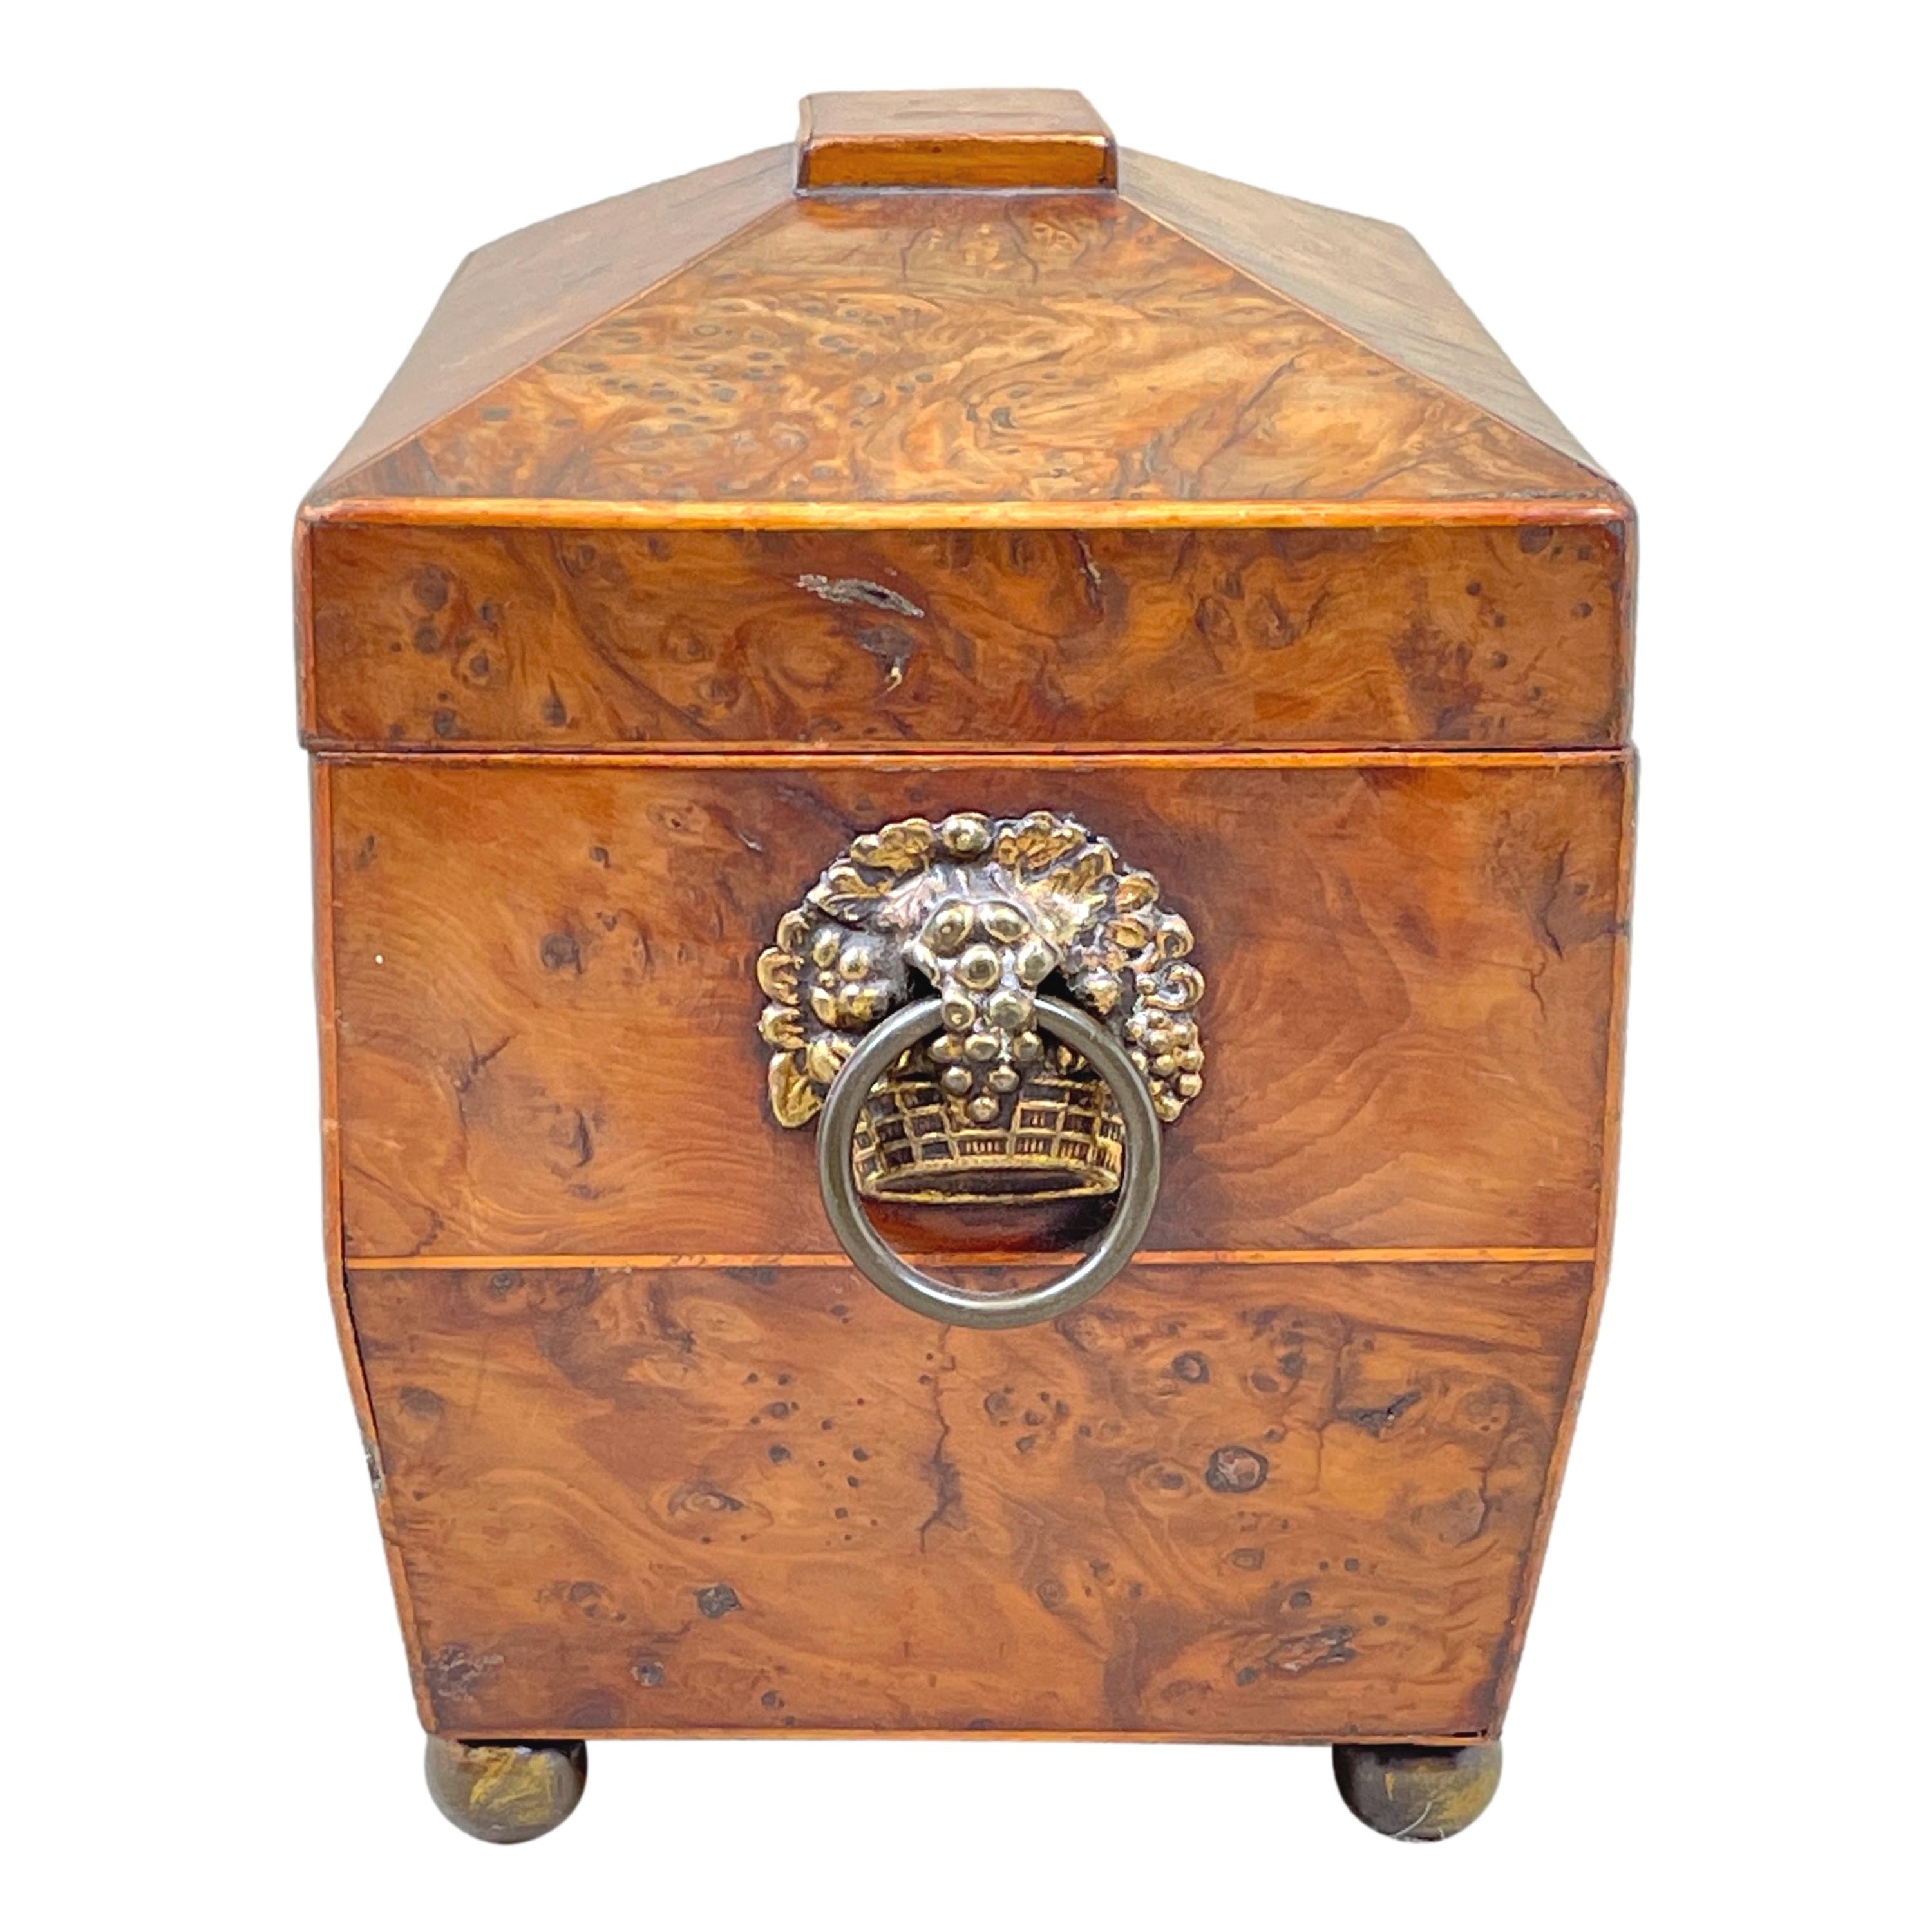 A Delightful Early 19th Century, Regency Period, Burr Yew Wood Tea Caddy Of Sarcophagus Form Having Boxwood Strung Decoration, Original Ormolu Handles To Sides And Hinged Top Enclosing Double Lidded Interior Raised On Brass Ball Feet.


This